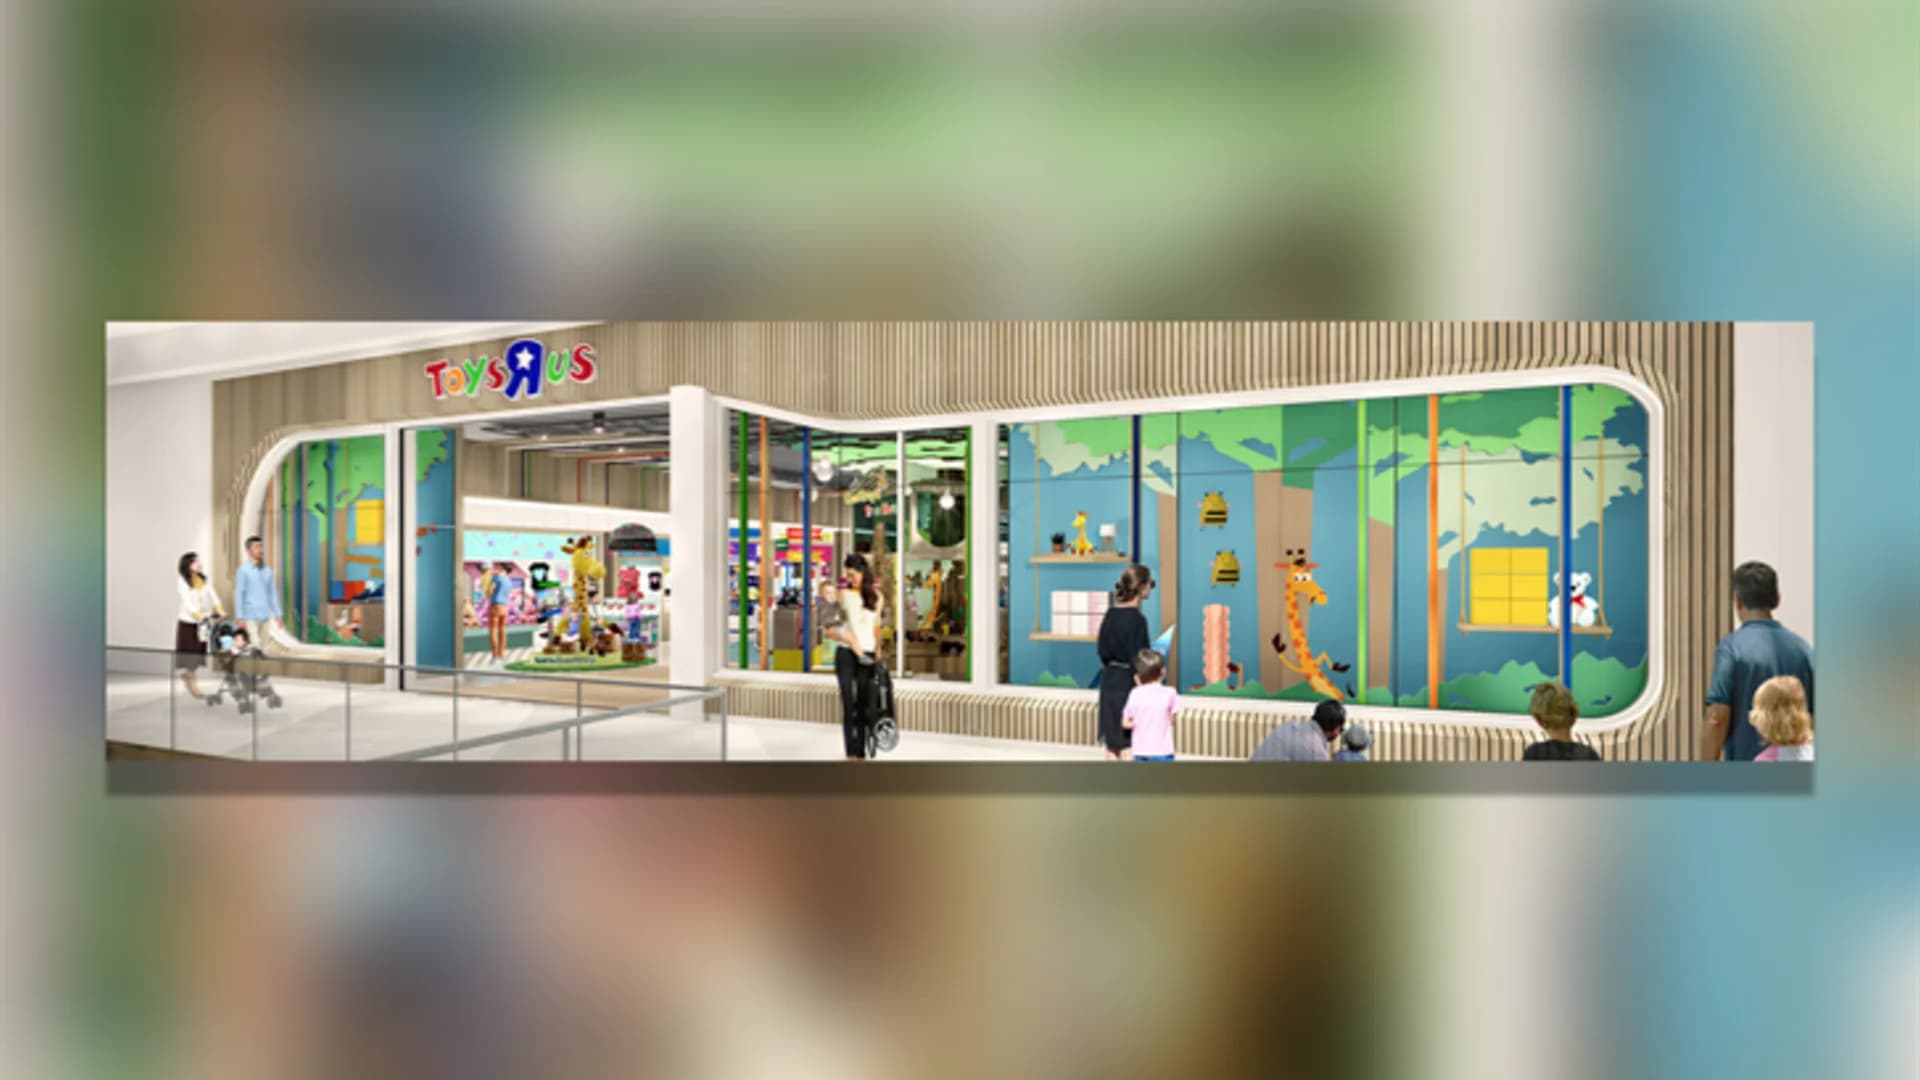 Toys R Us makes small comeback with 2 stores, including New Jersey location